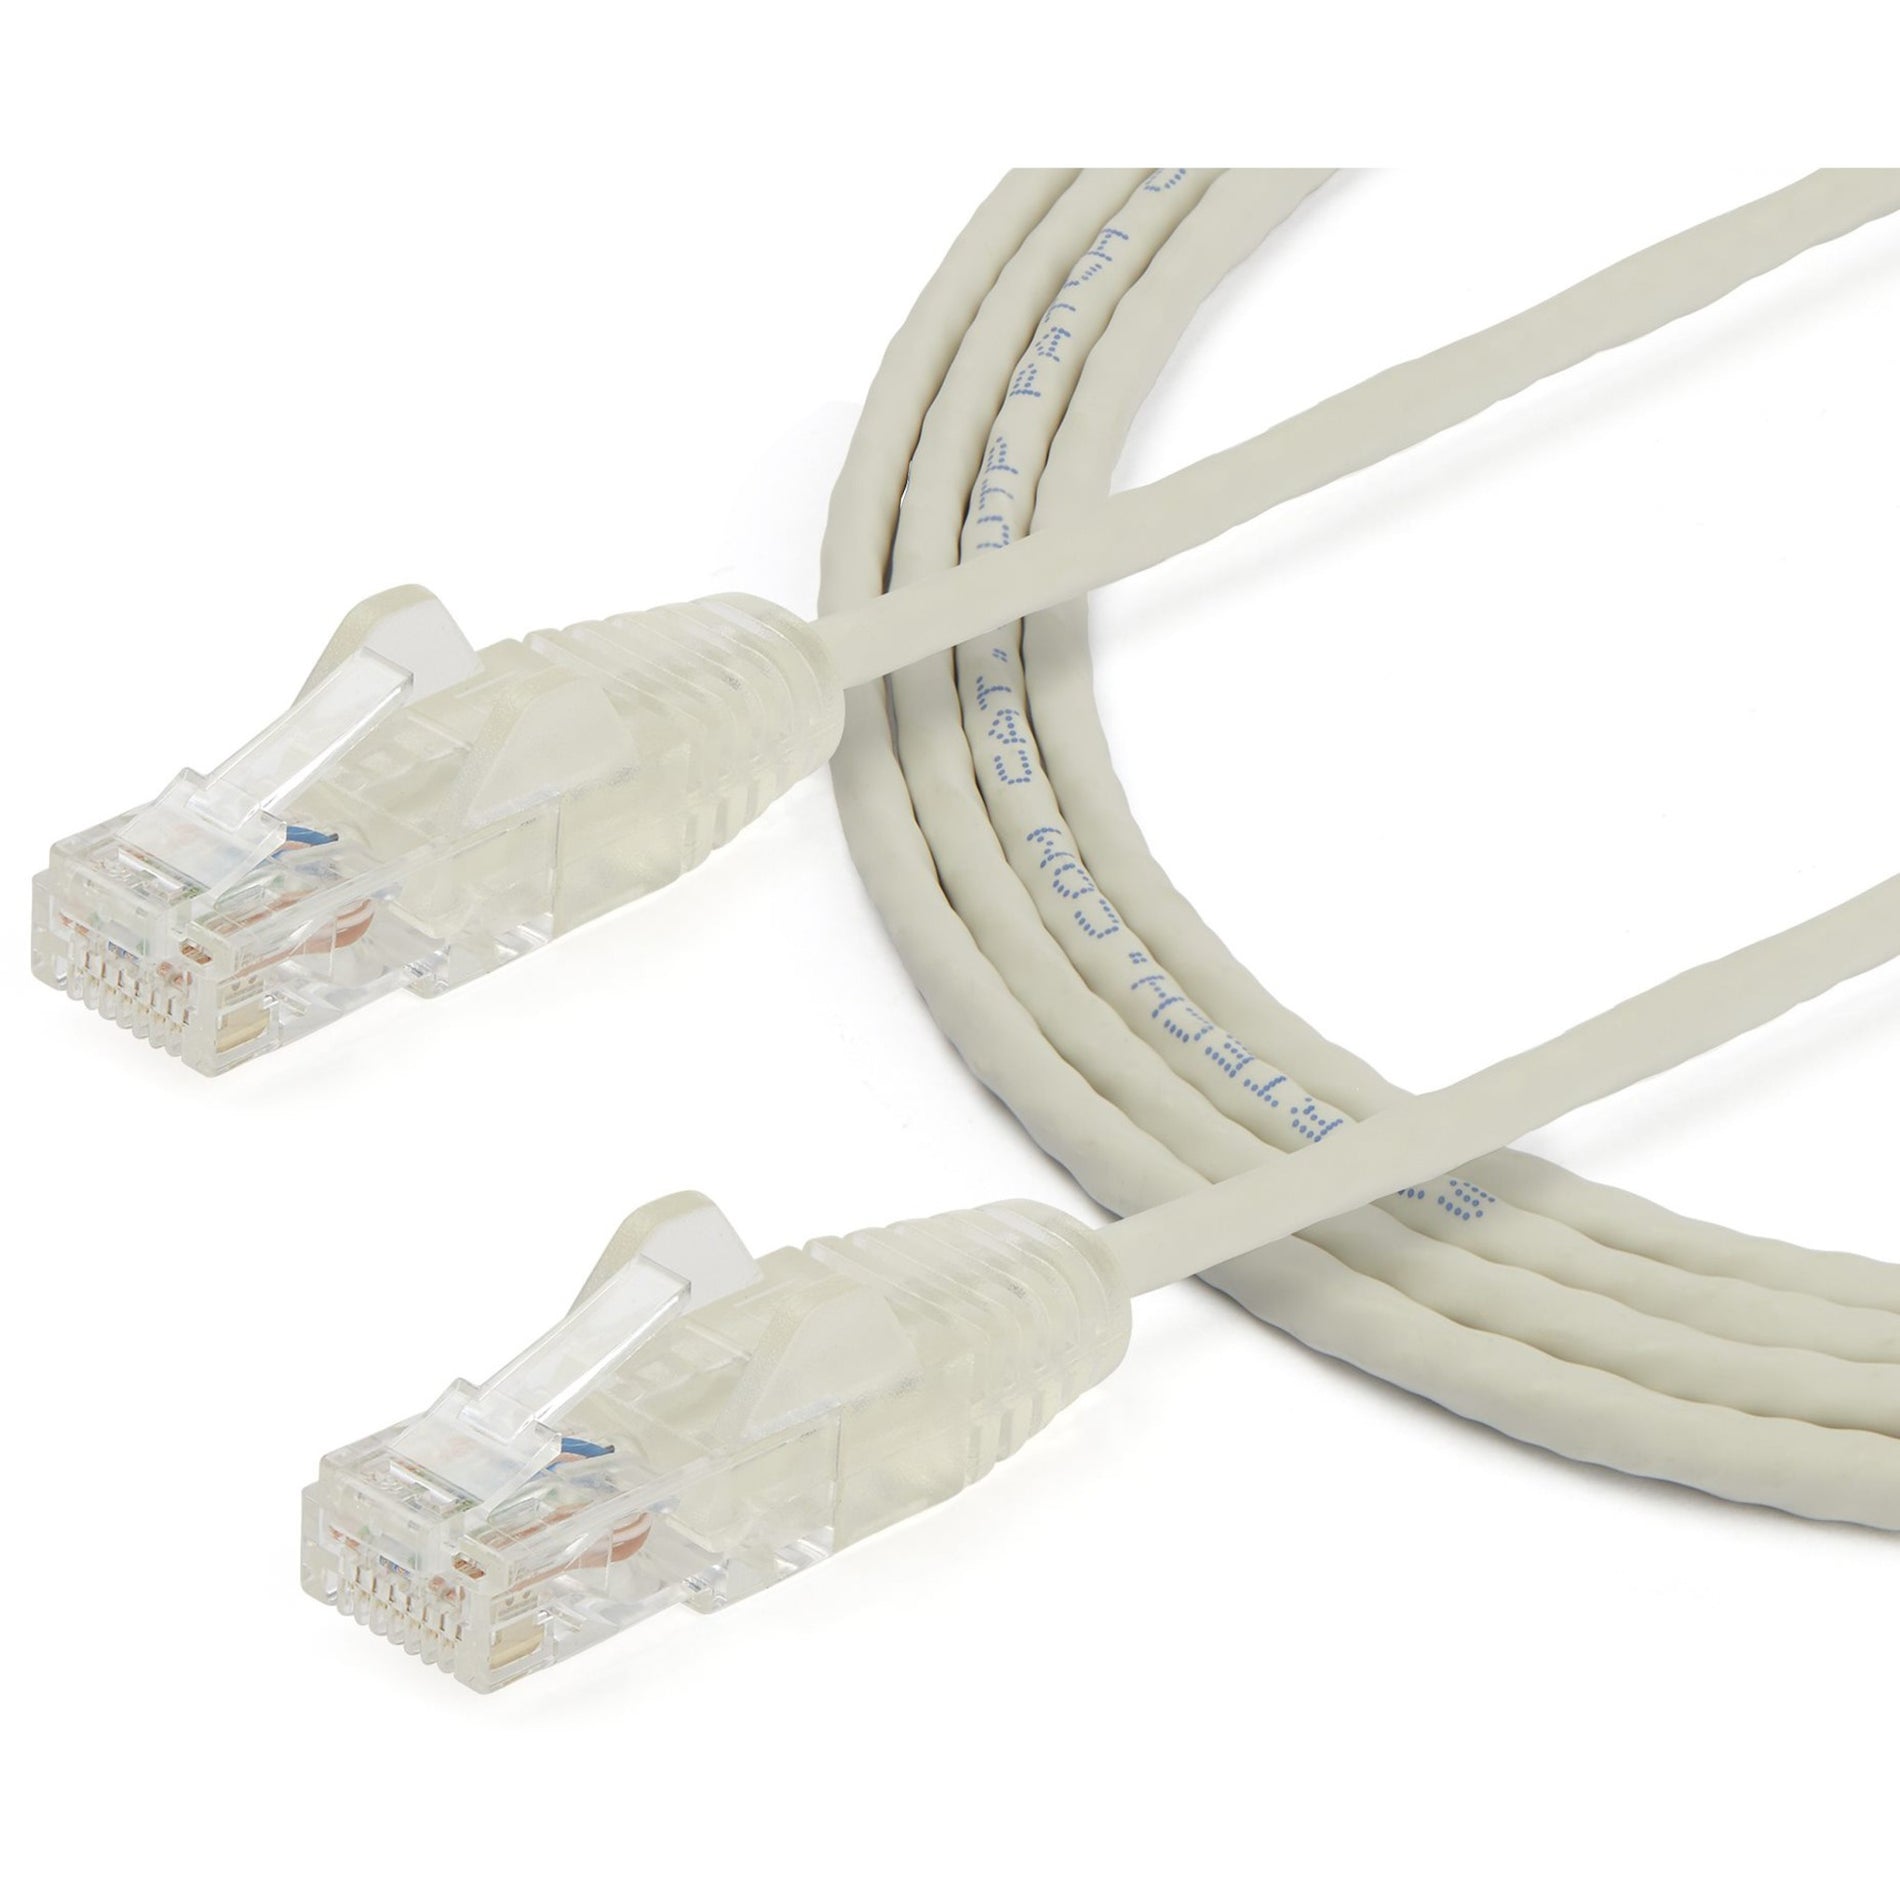 StarTech.com N6PAT6GRS Cat6 Patch Network Cable, 6 ft Gray Ethernet Cable - Slim, Snagless RJ45 Connectors, Cat6 Cable, Cat6 Patch Cable, Cat6 Network Cable